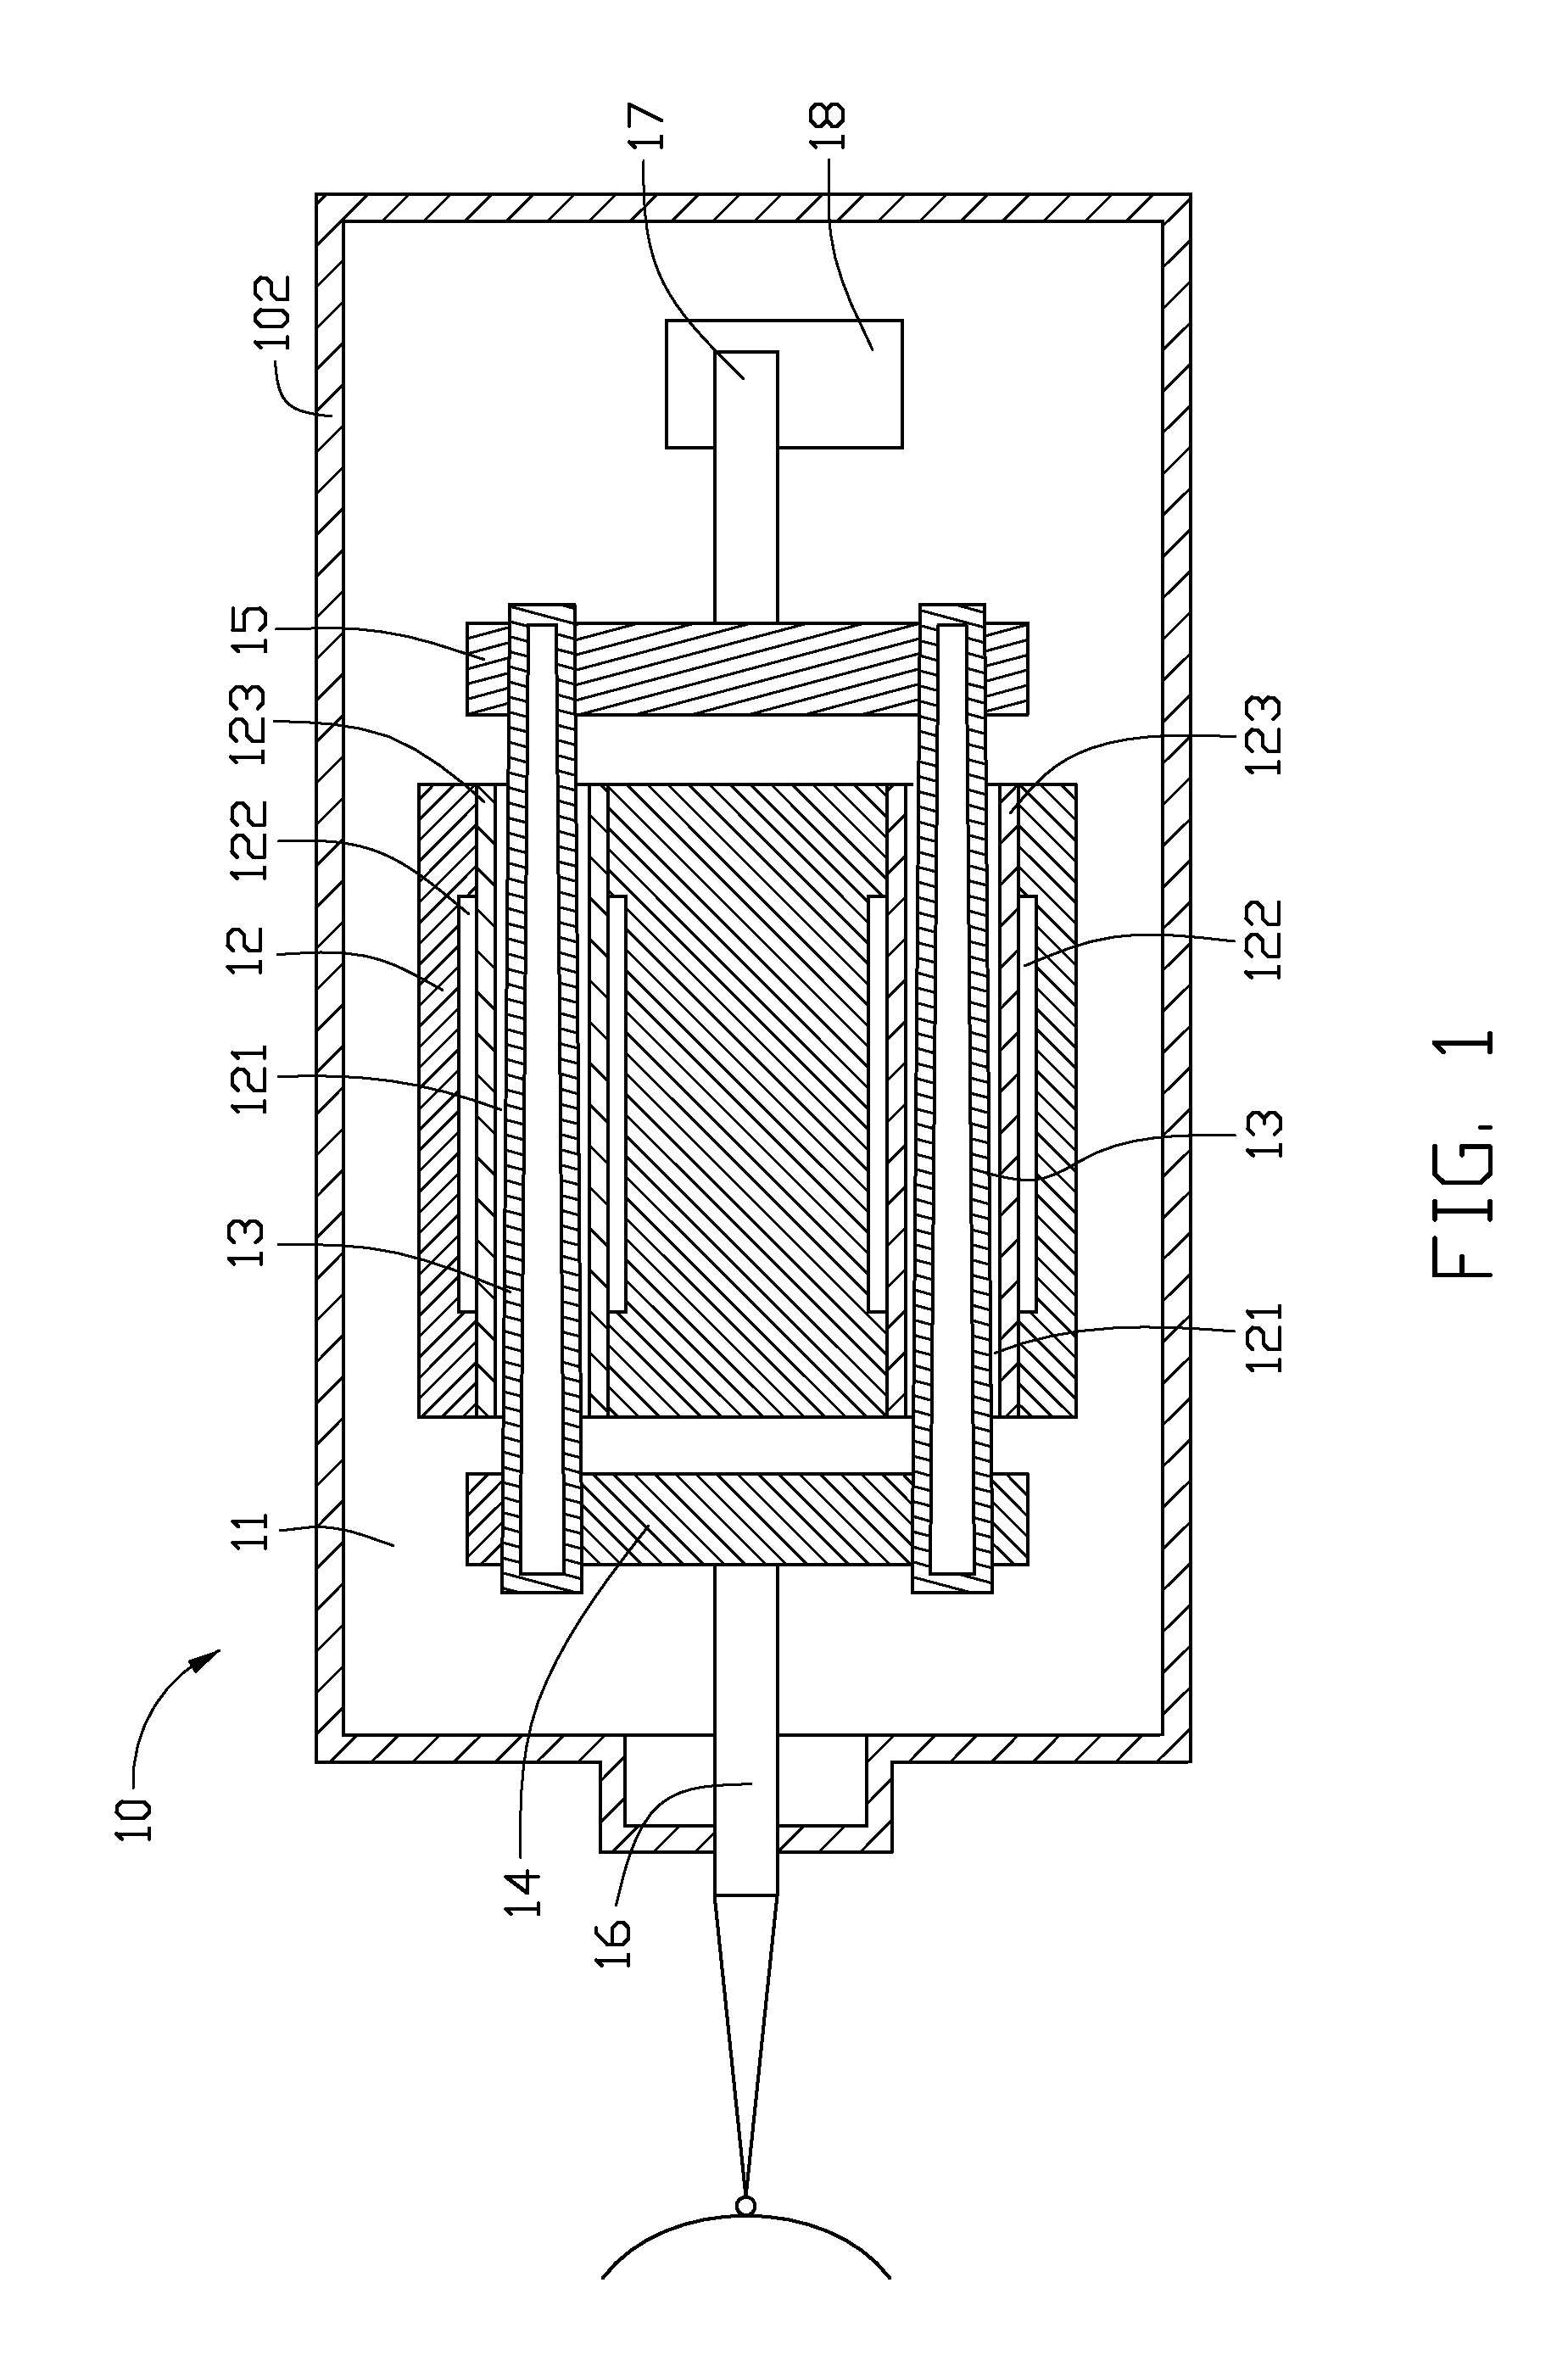 Contour measuring probe for measuring aspects of objects